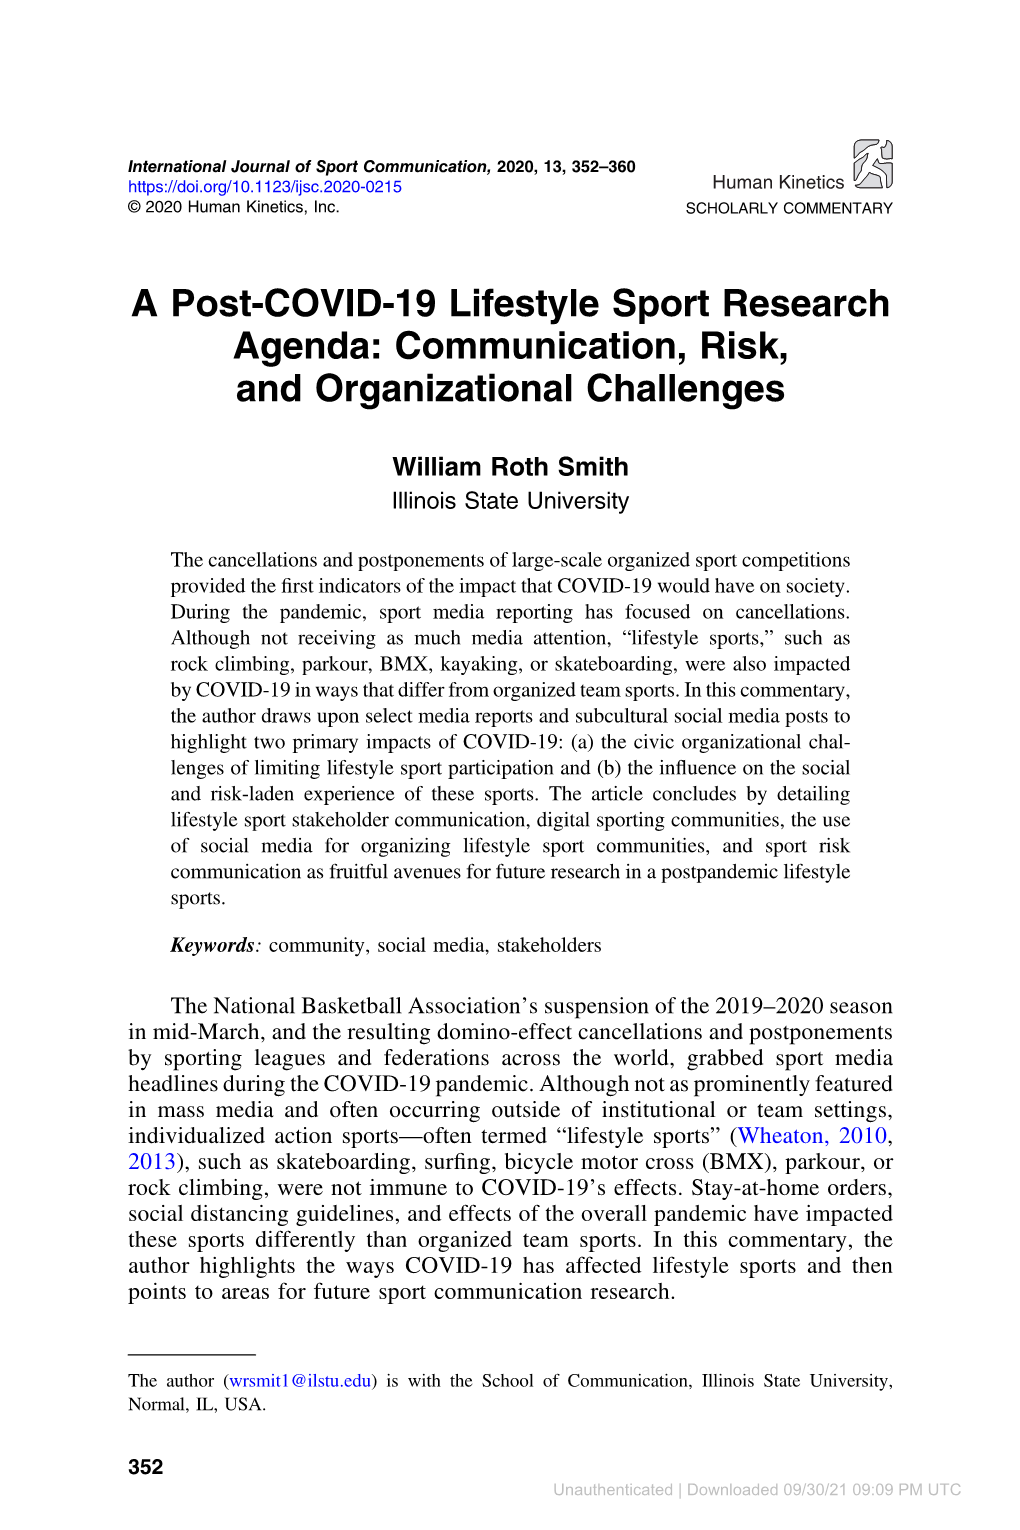 A Post-COVID-19 Lifestyle Sport Research Agenda: Communication, Risk, and Organizational Challenges